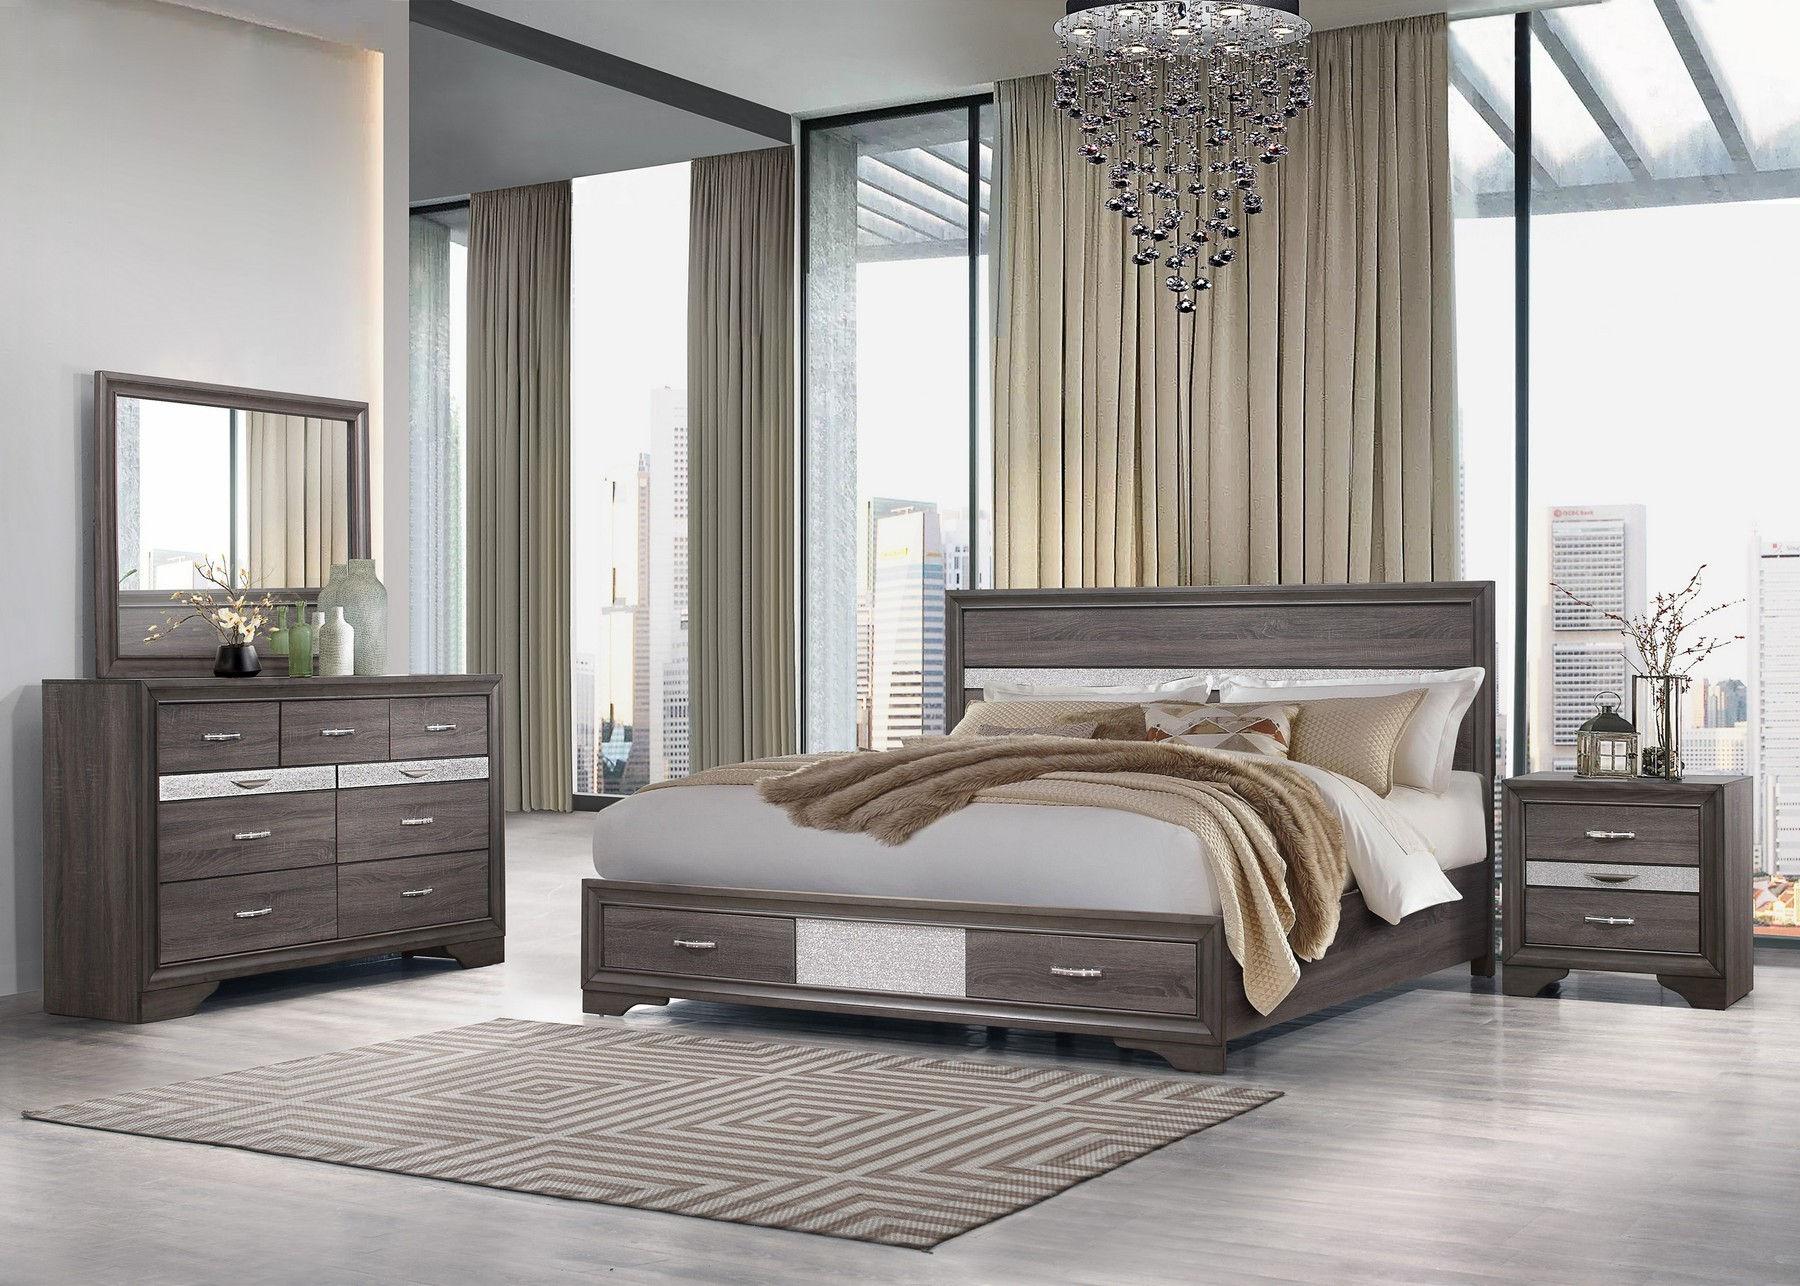 

    
SEVILLE Contemporary Storage King Bed Set 4Pcs in Weathered Grey Global US
